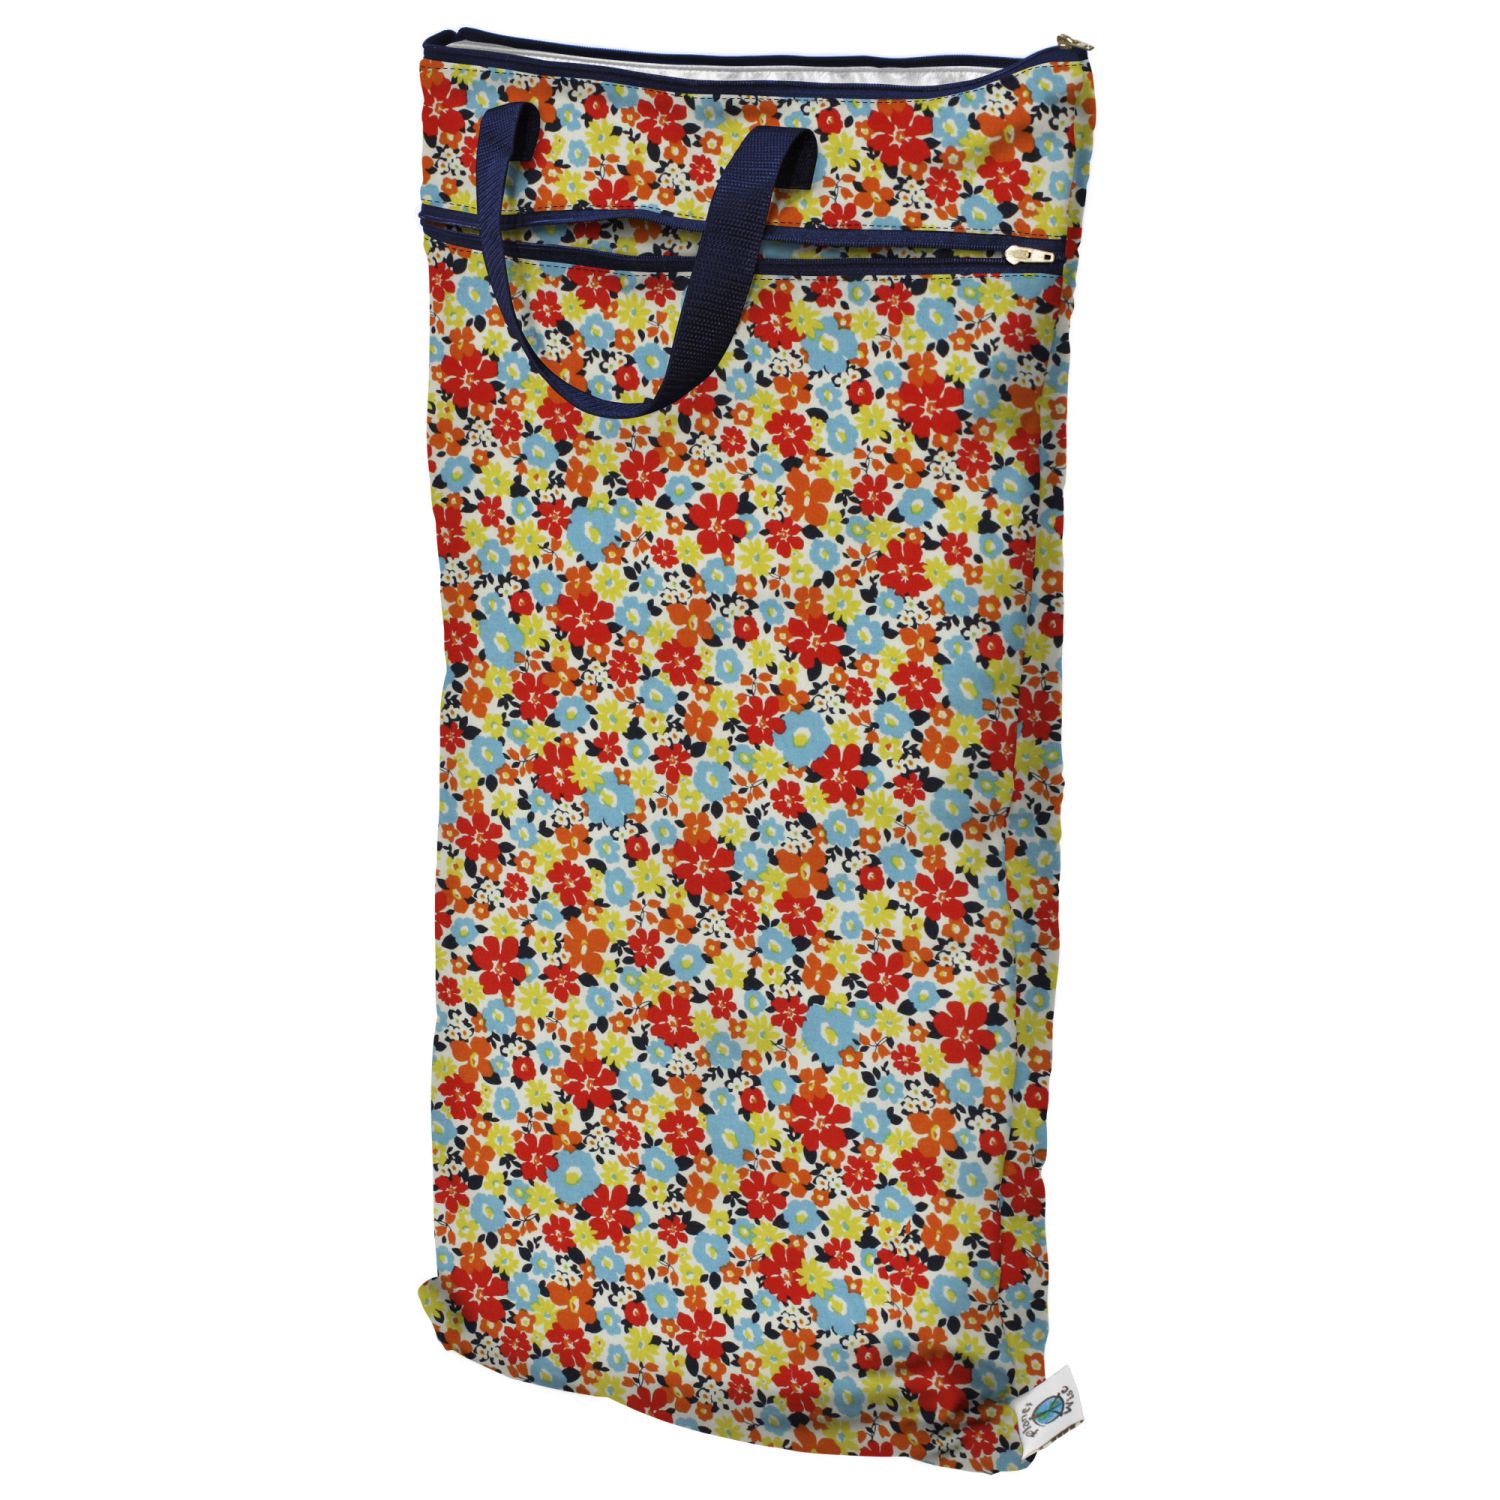 Planet Wise Hanging Wet/Dry Bag (XL)